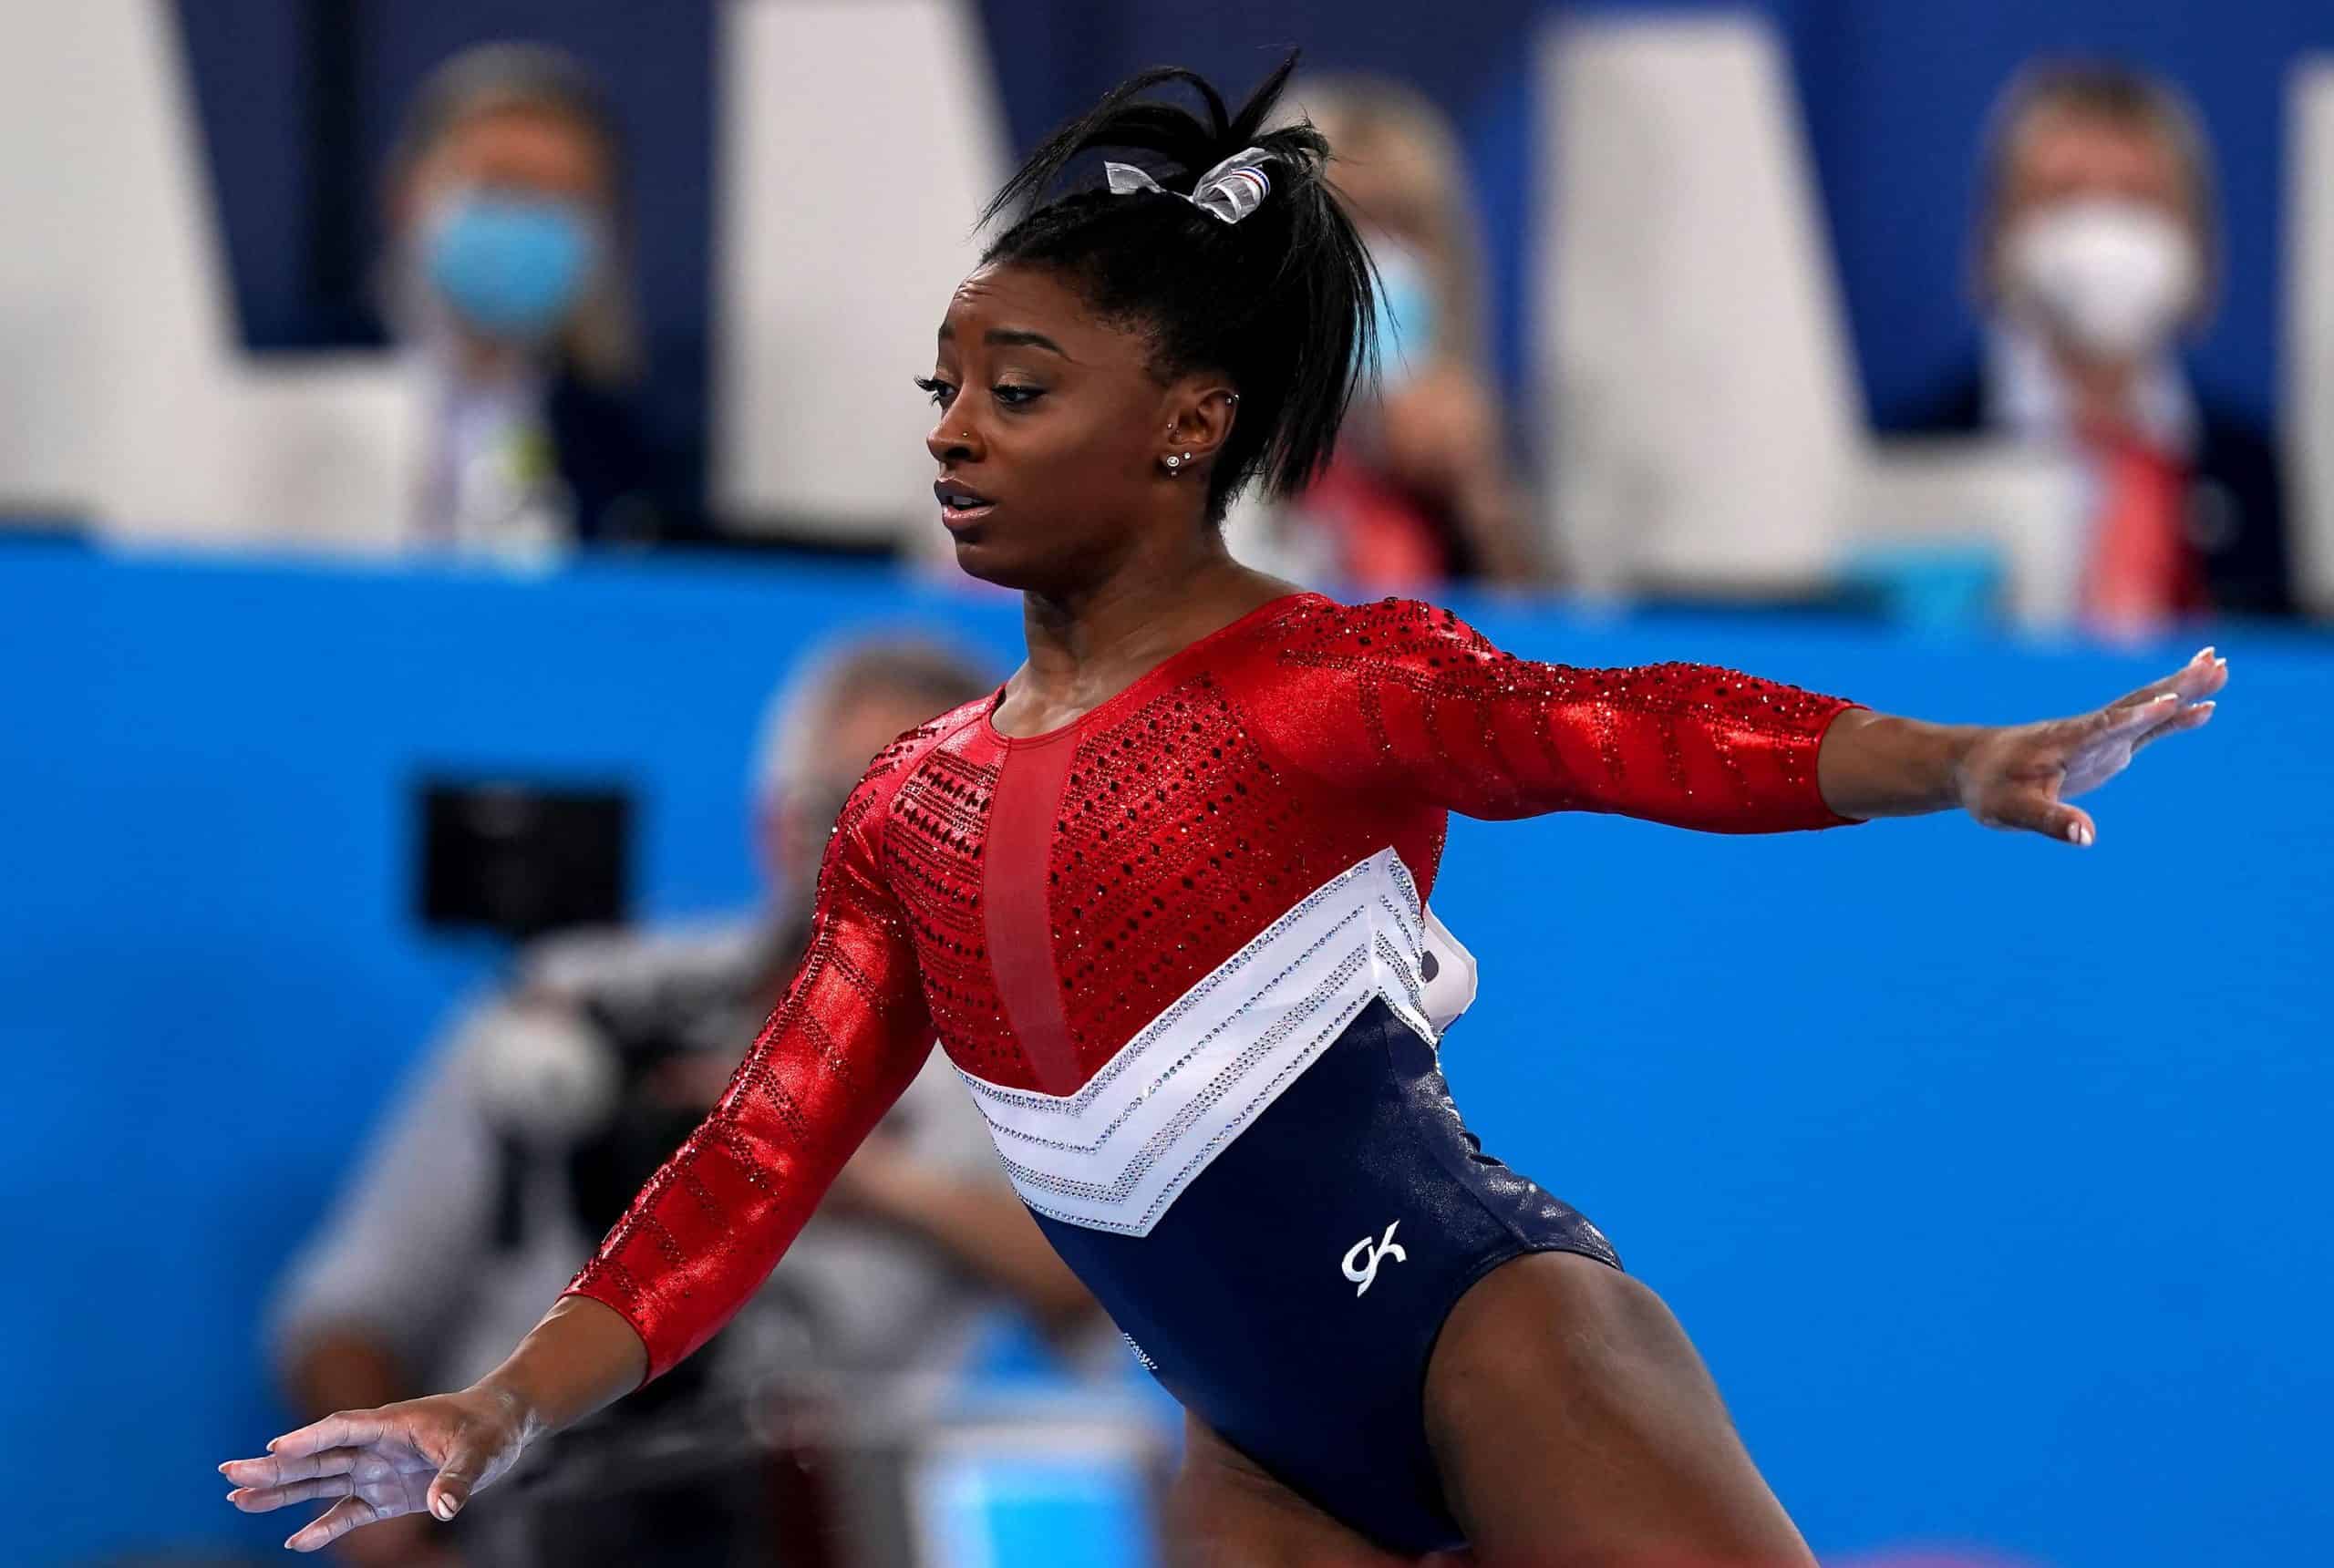 Simone Biles praised for speaking out about mental health struggles